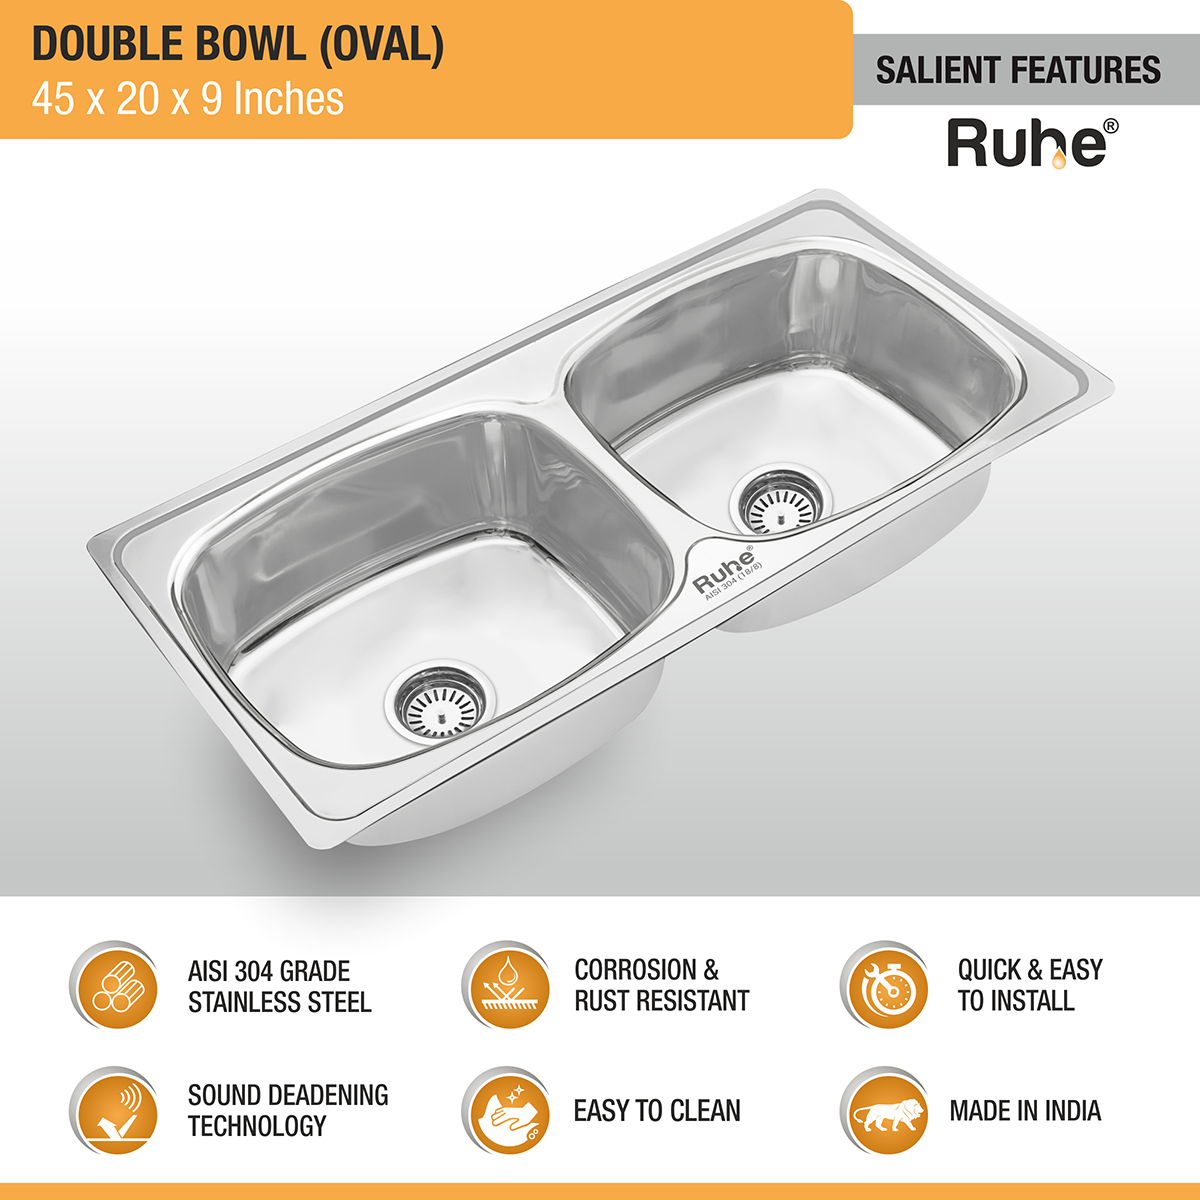 Oval Double Bowl (45 x 20 x 9 inches) 304-Grade Kitchen Sink features and benefits